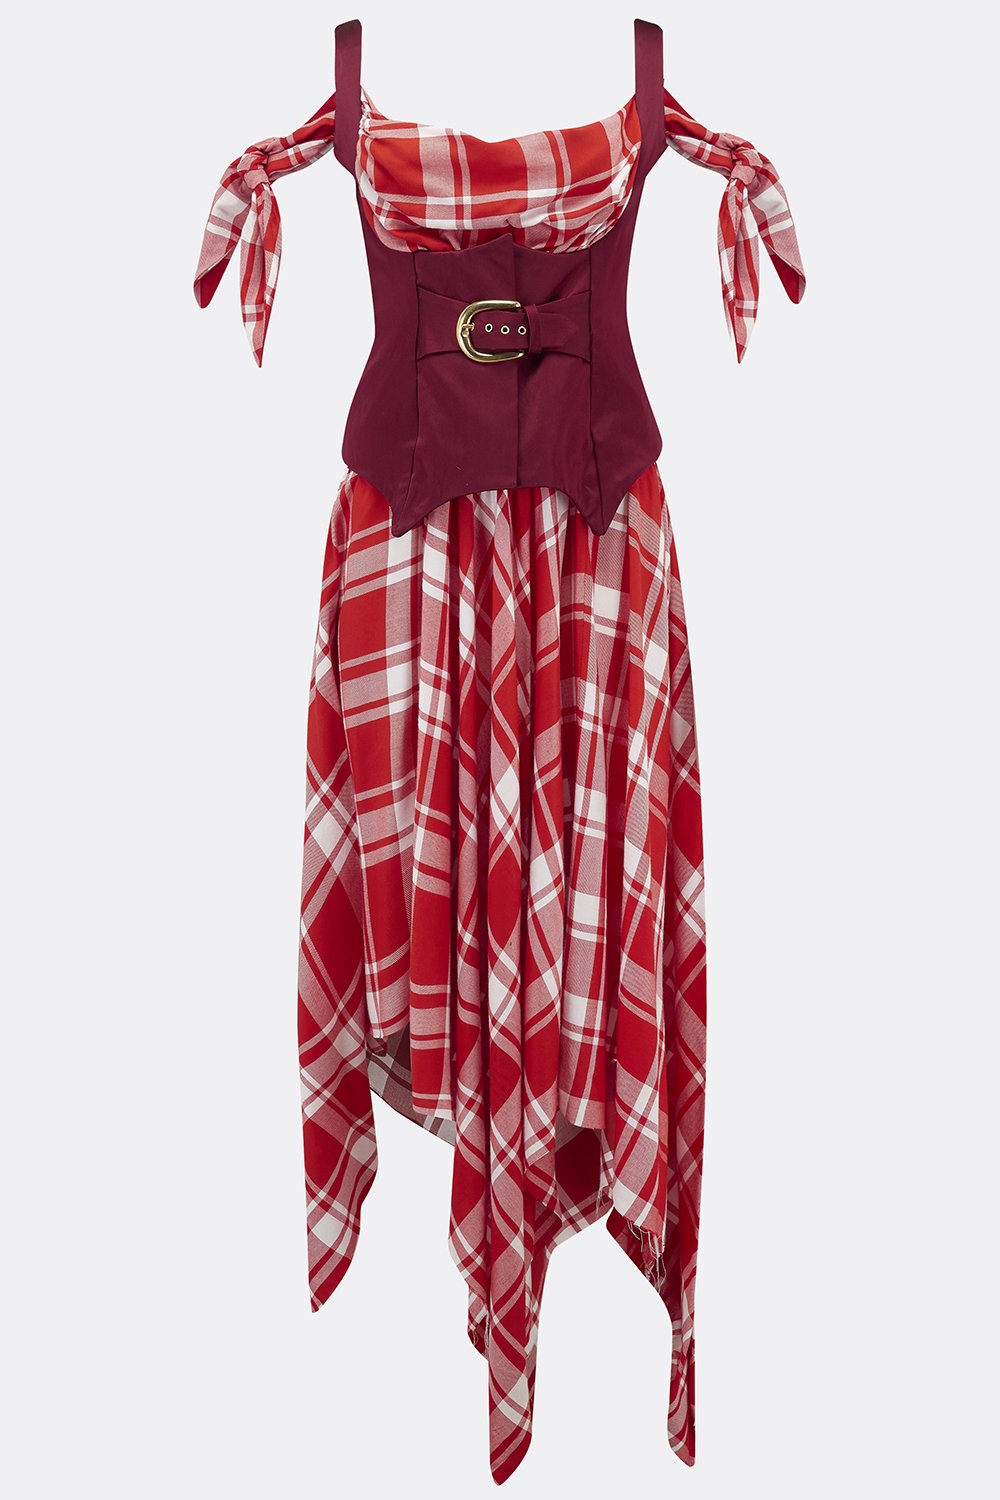 TORTUGA DRESS IN RED CHECK-womenswear-A Child Of The Jago